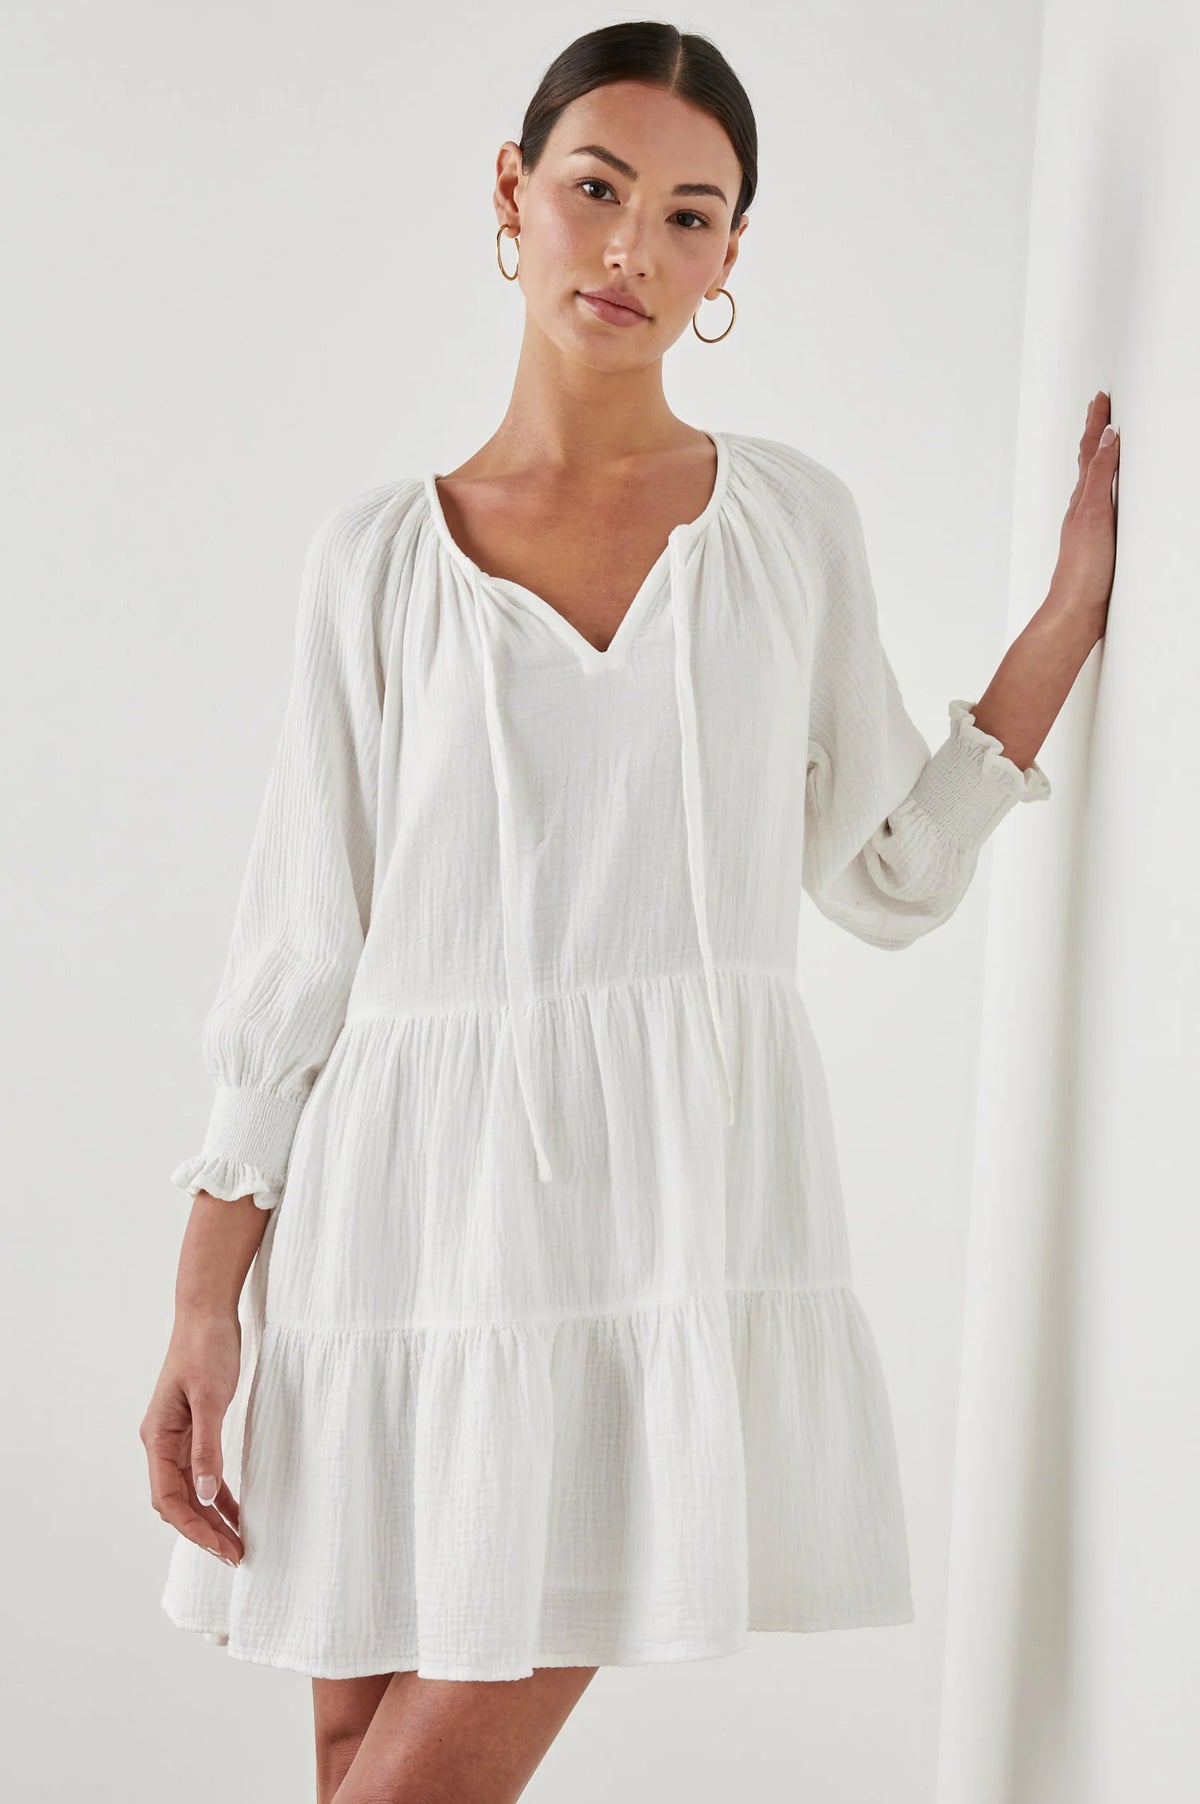 White notch neck cheesecloth dress with double tier and bracelet length sleeves with ruching detail